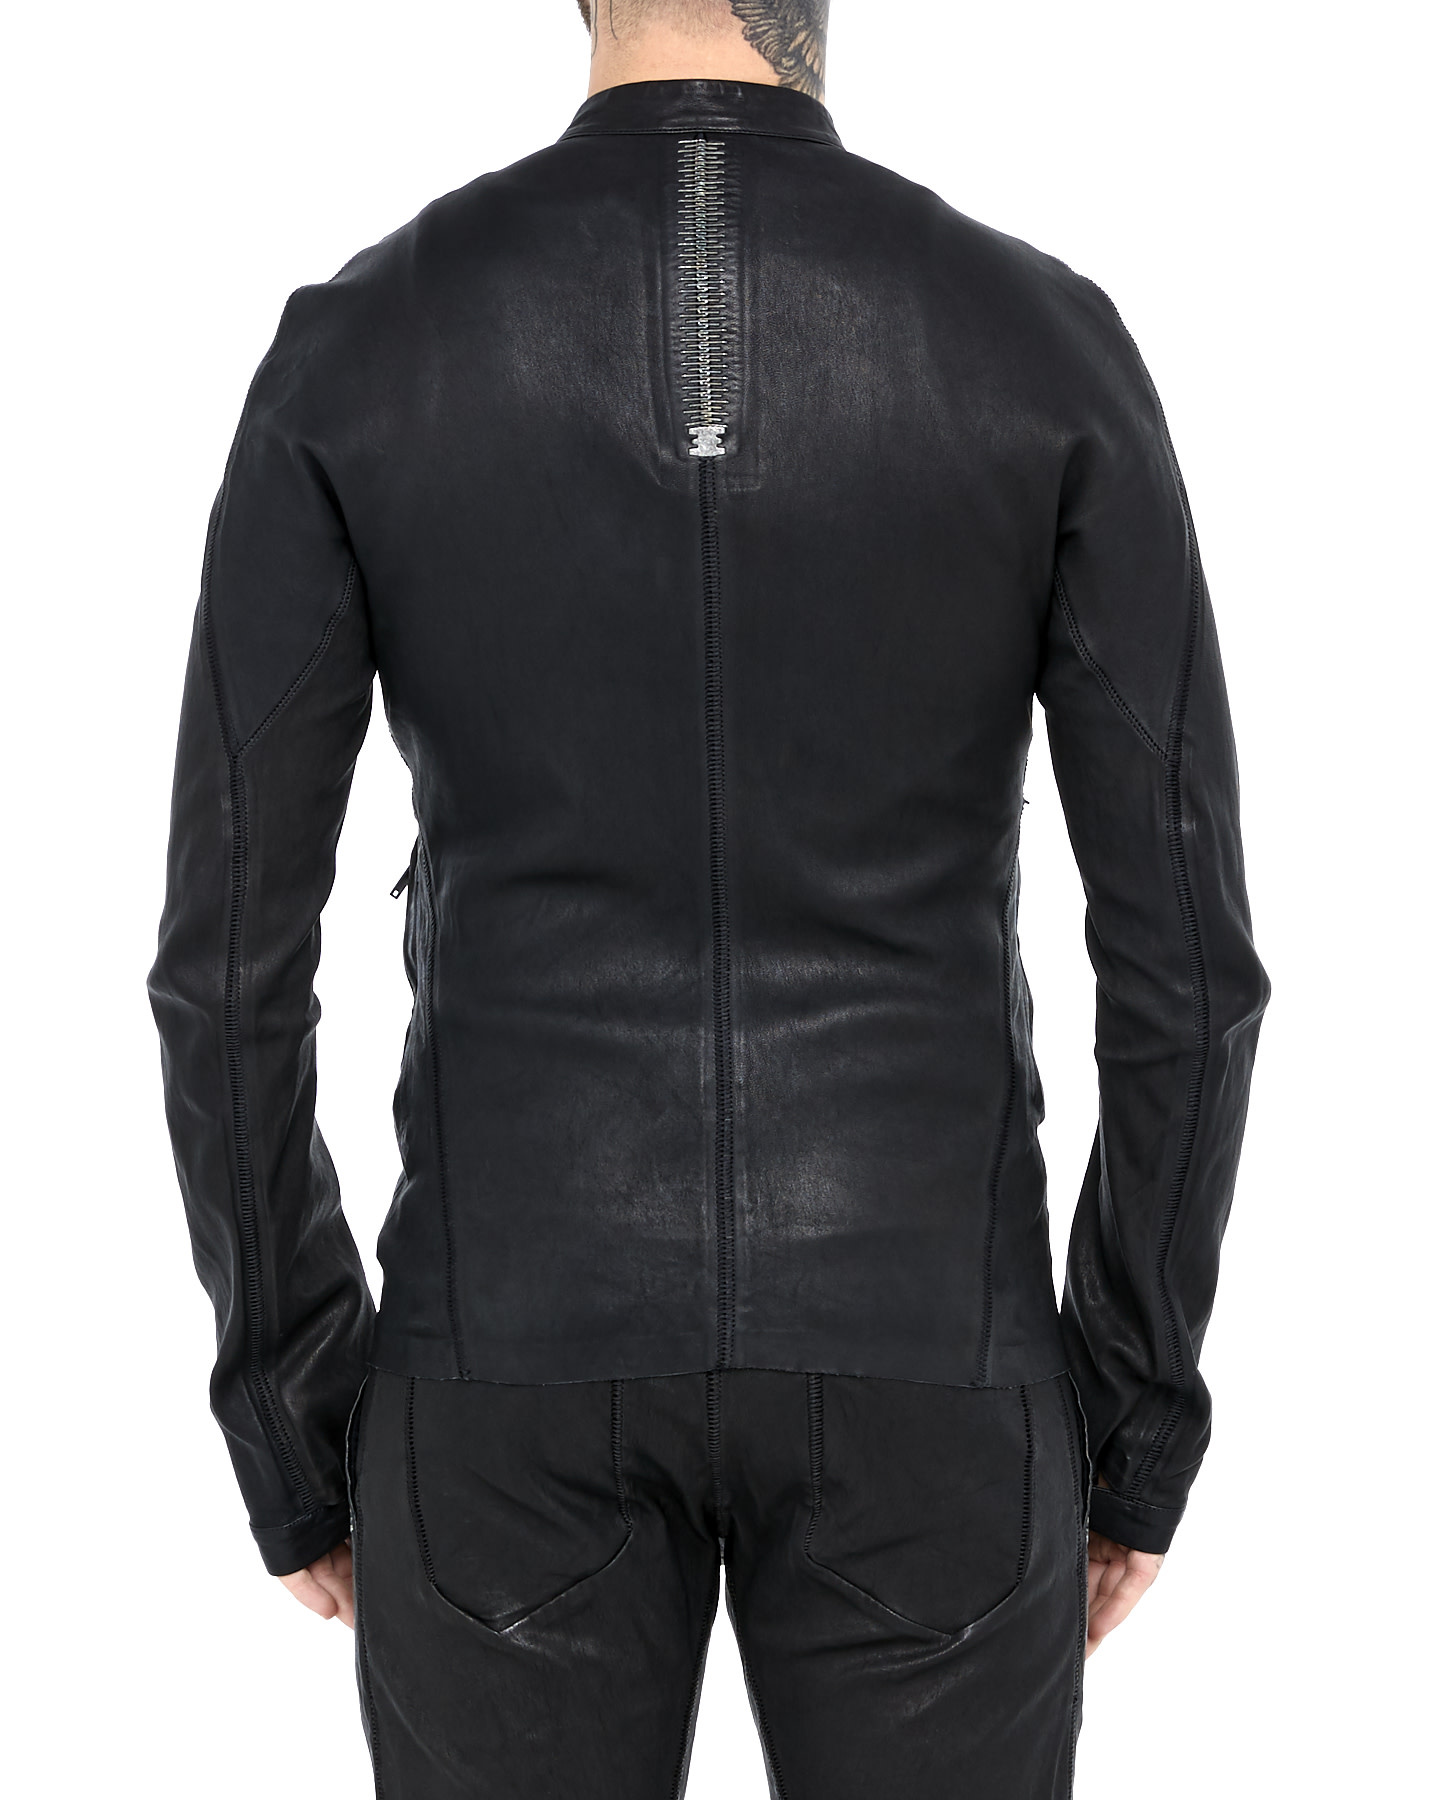 Untitled - Neo Sellam Shop Leather Bute | Jacket by NYC Isaac NYC Stretch Shop Untitled